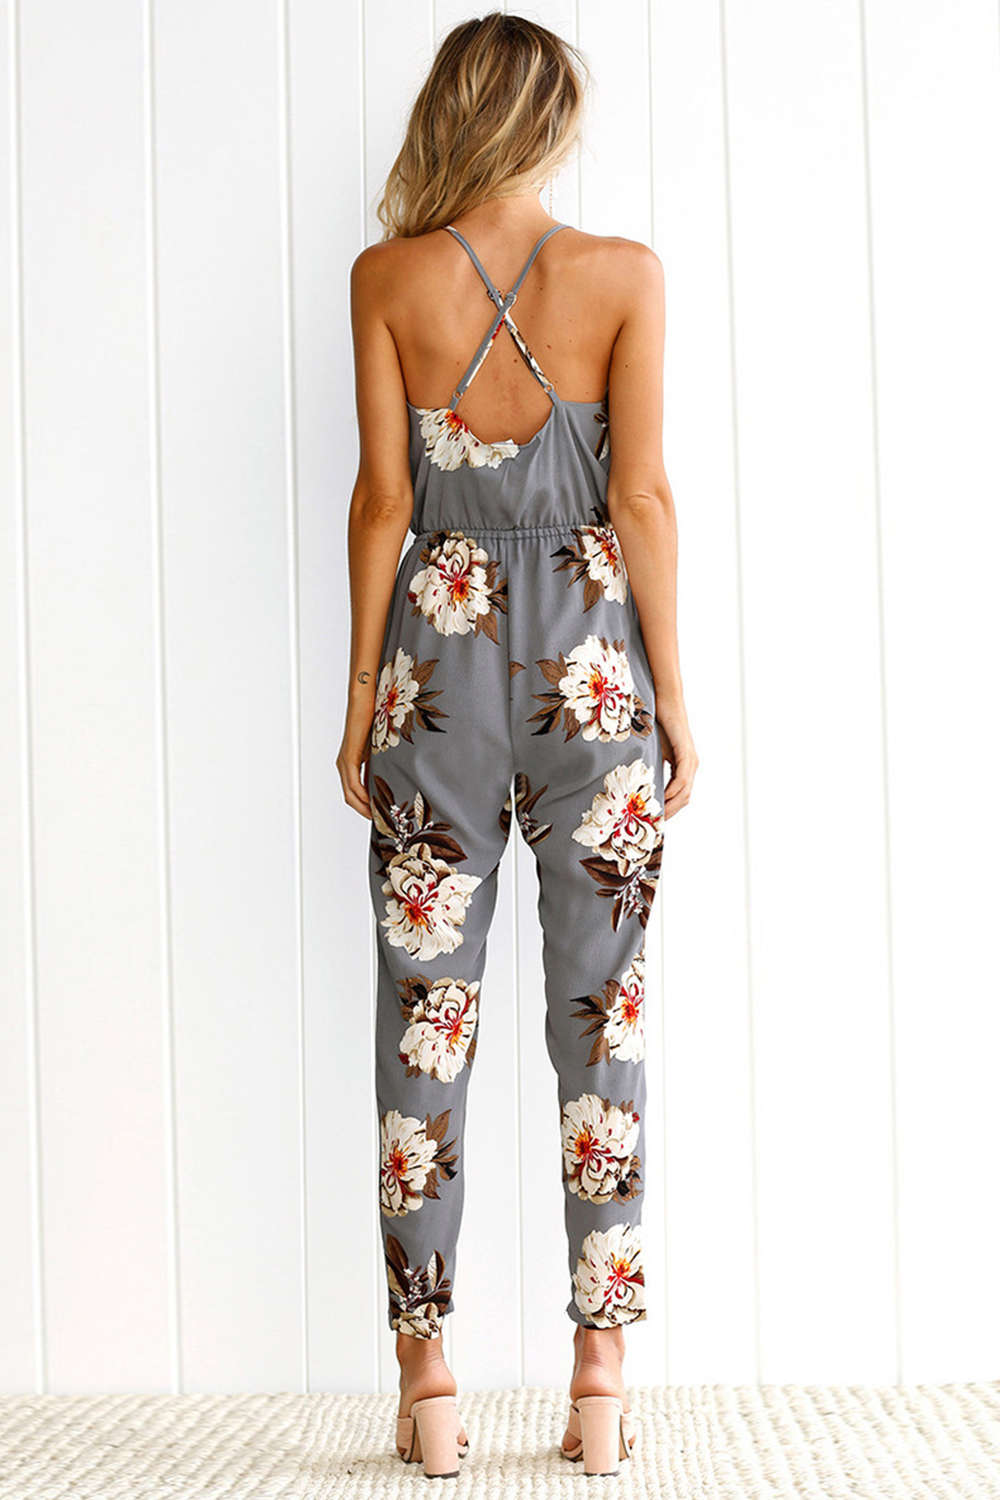 Iyasson Sleeveless Backless Floral Printed Jumpsuit